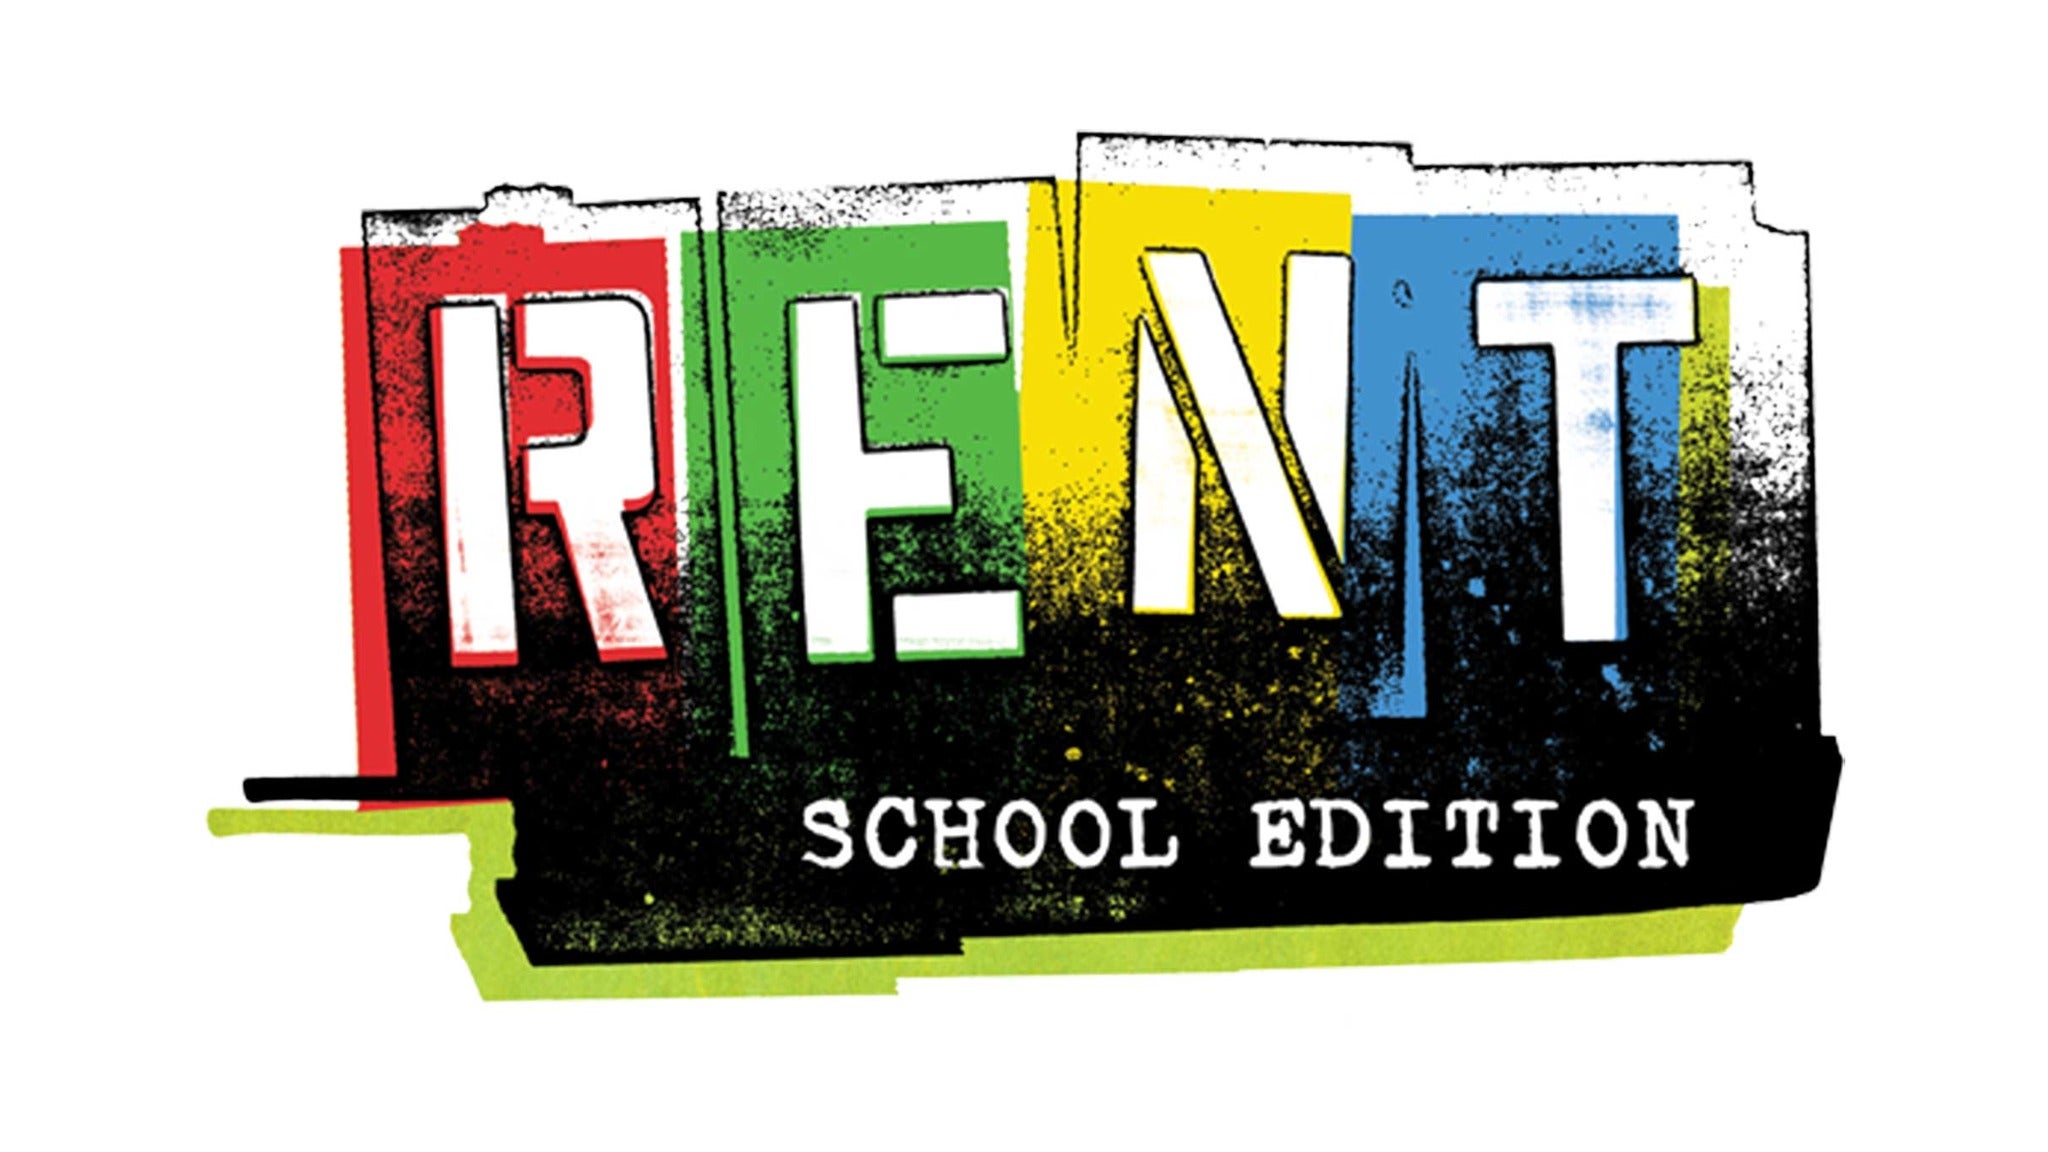 Rent (Touring) in Fresno promo photo for Ticketmaster CEN presale offer code